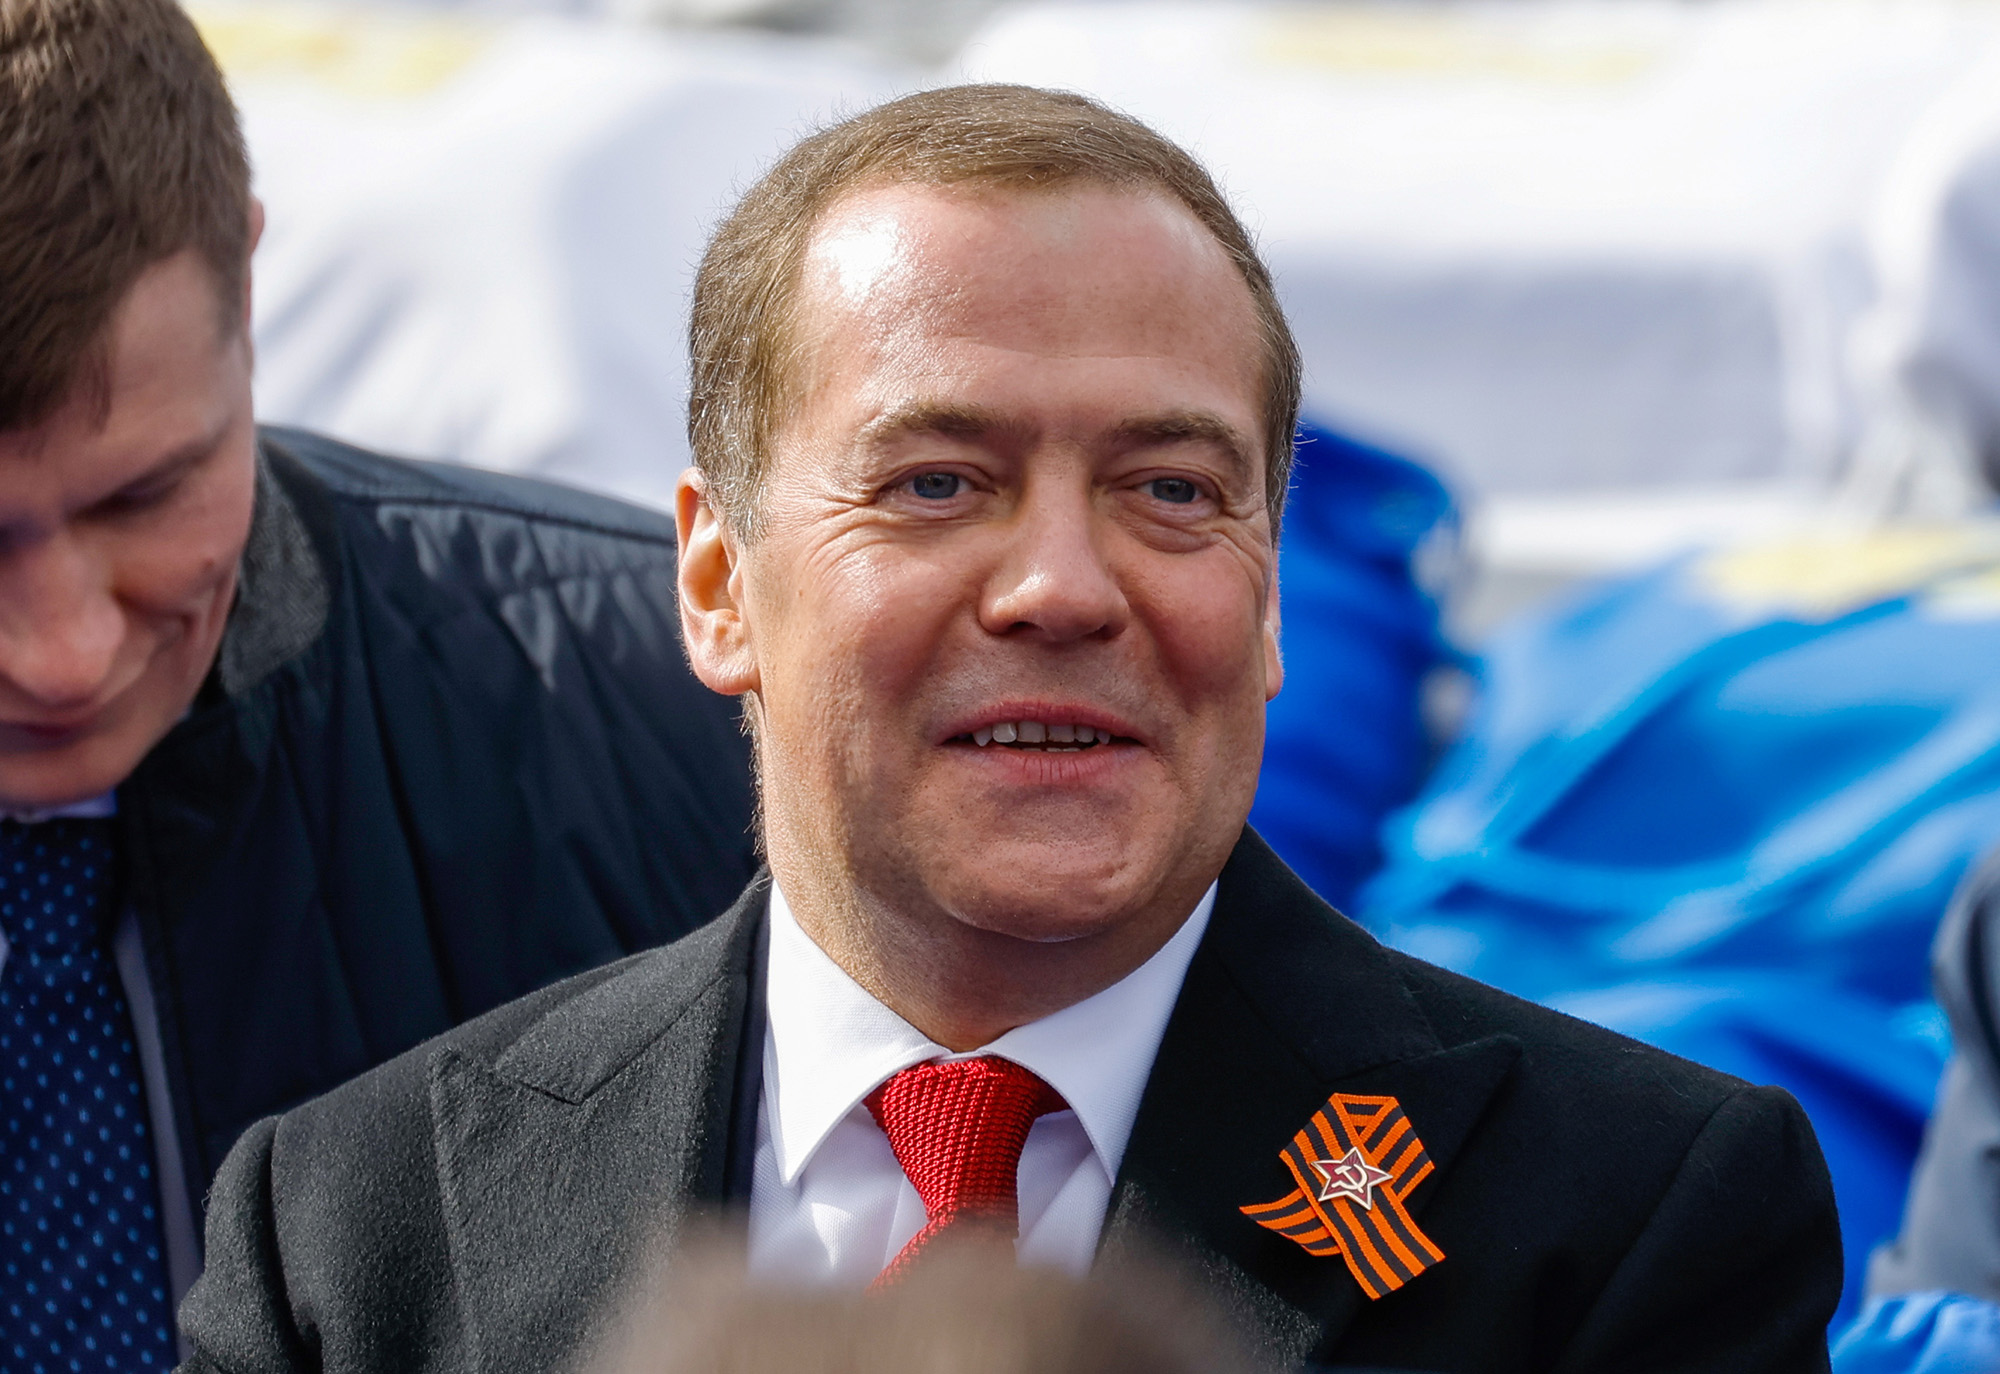 Dmitry Medvedev attends a military parade on Victory Day in Red Square, Moscow, Russia, on May 9.